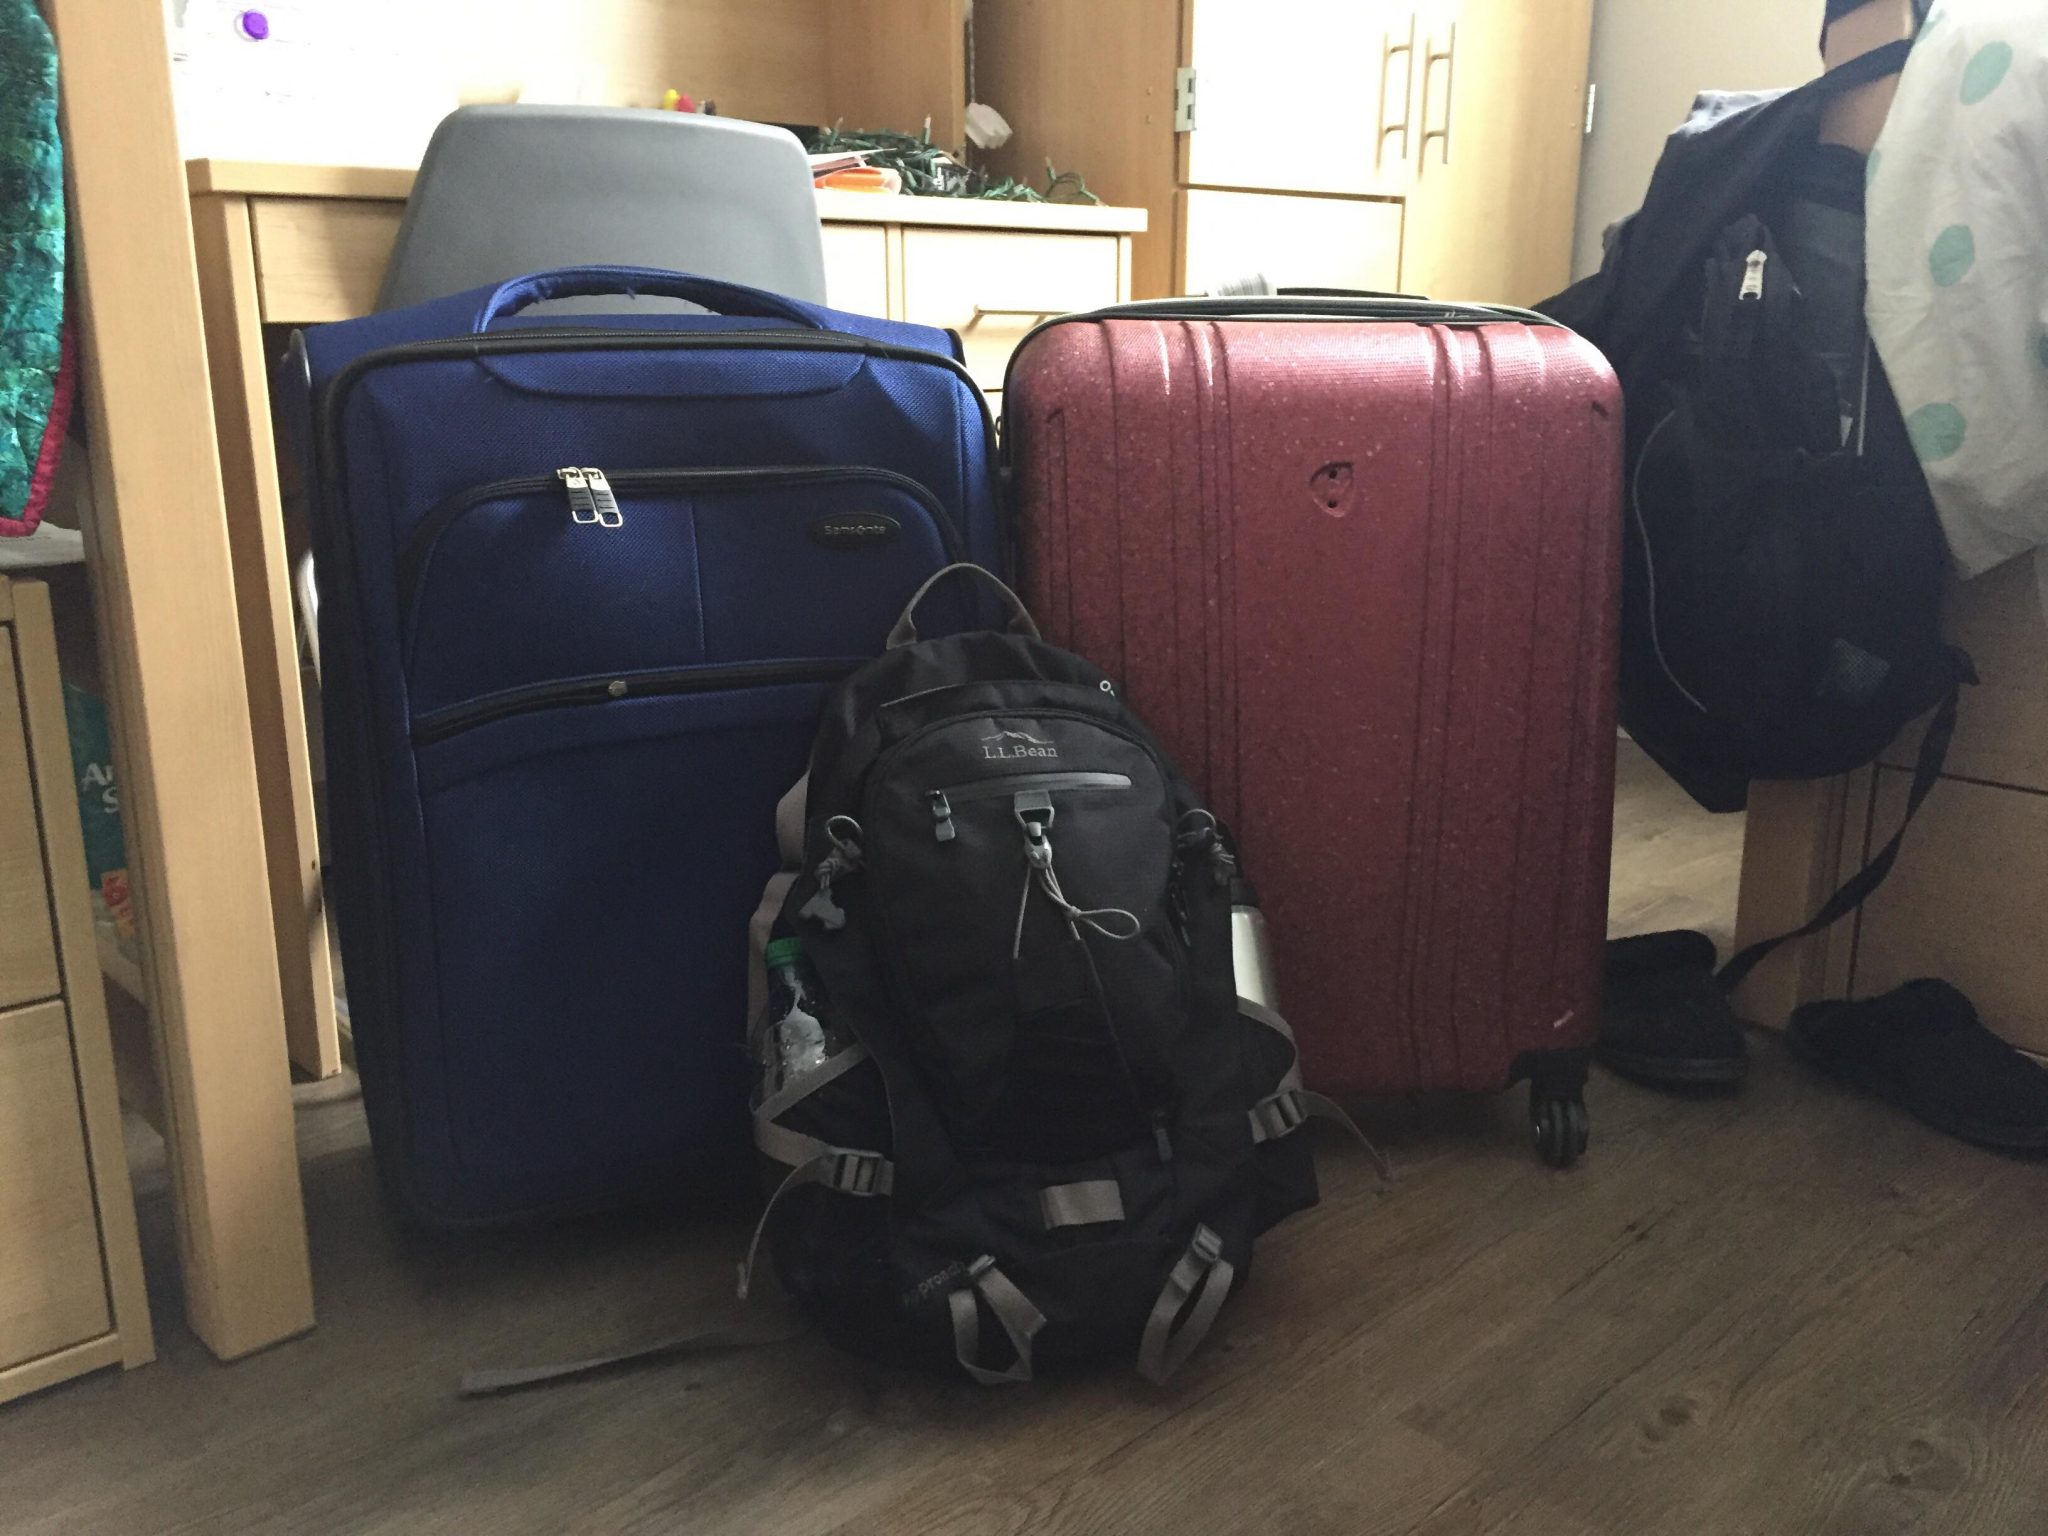 10 Packing Tips for Study Abroad | Penmen Press